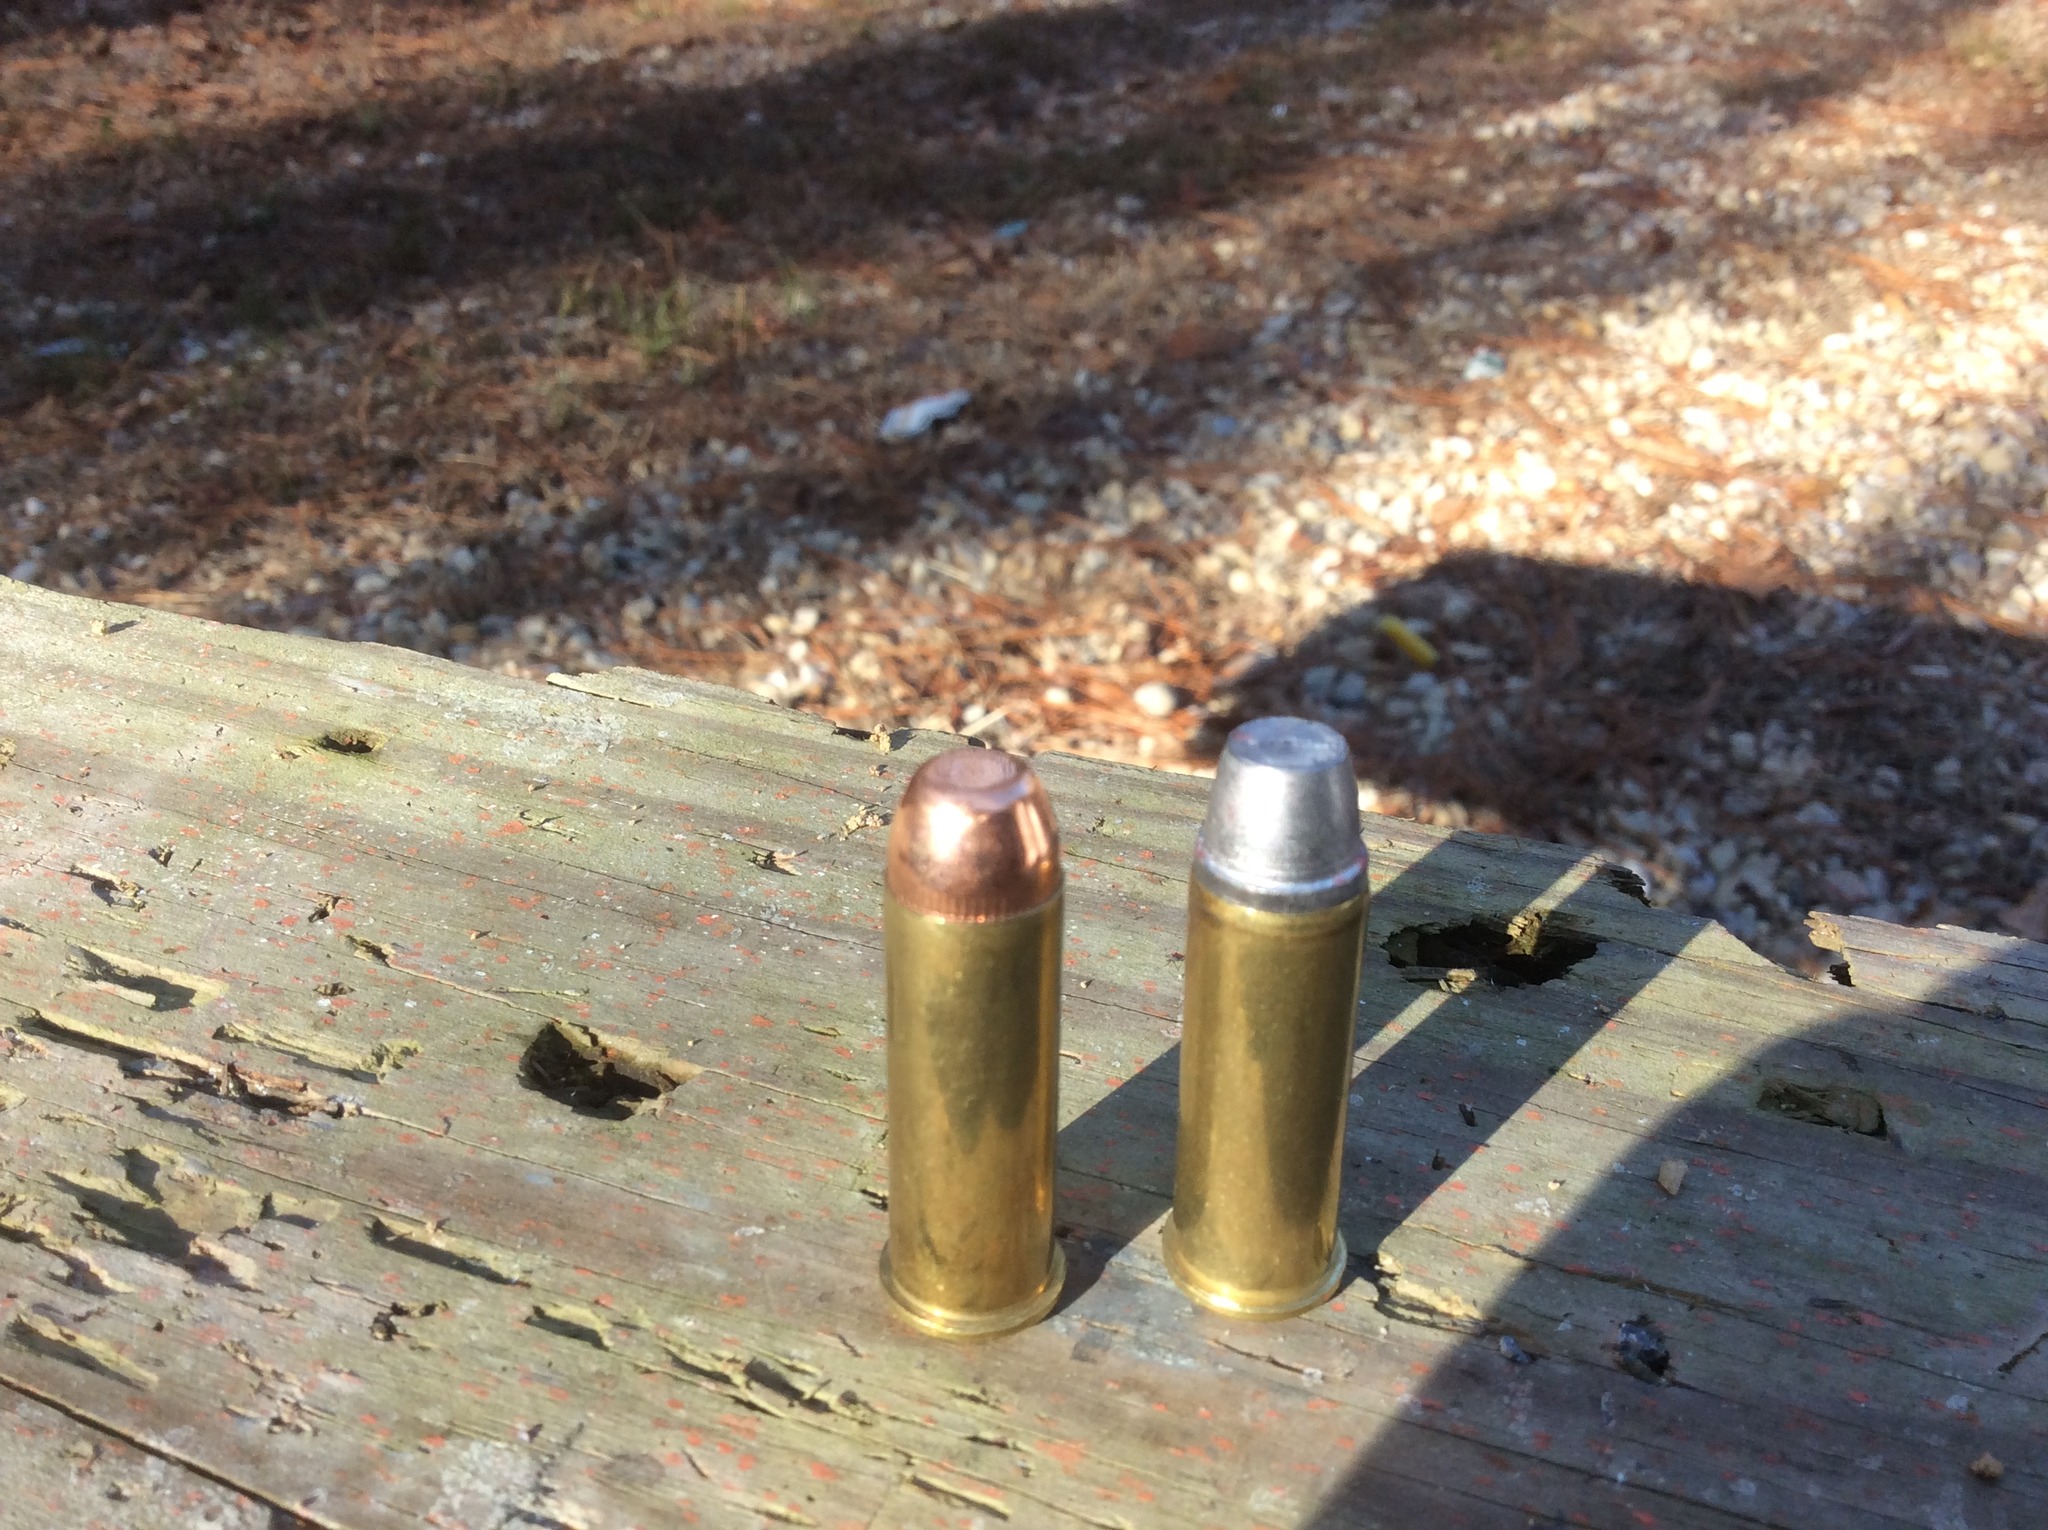 44 mag 200 gr xtreme and matts bullets 230 gr swc all with 9 gr BE-86 powder.jpg